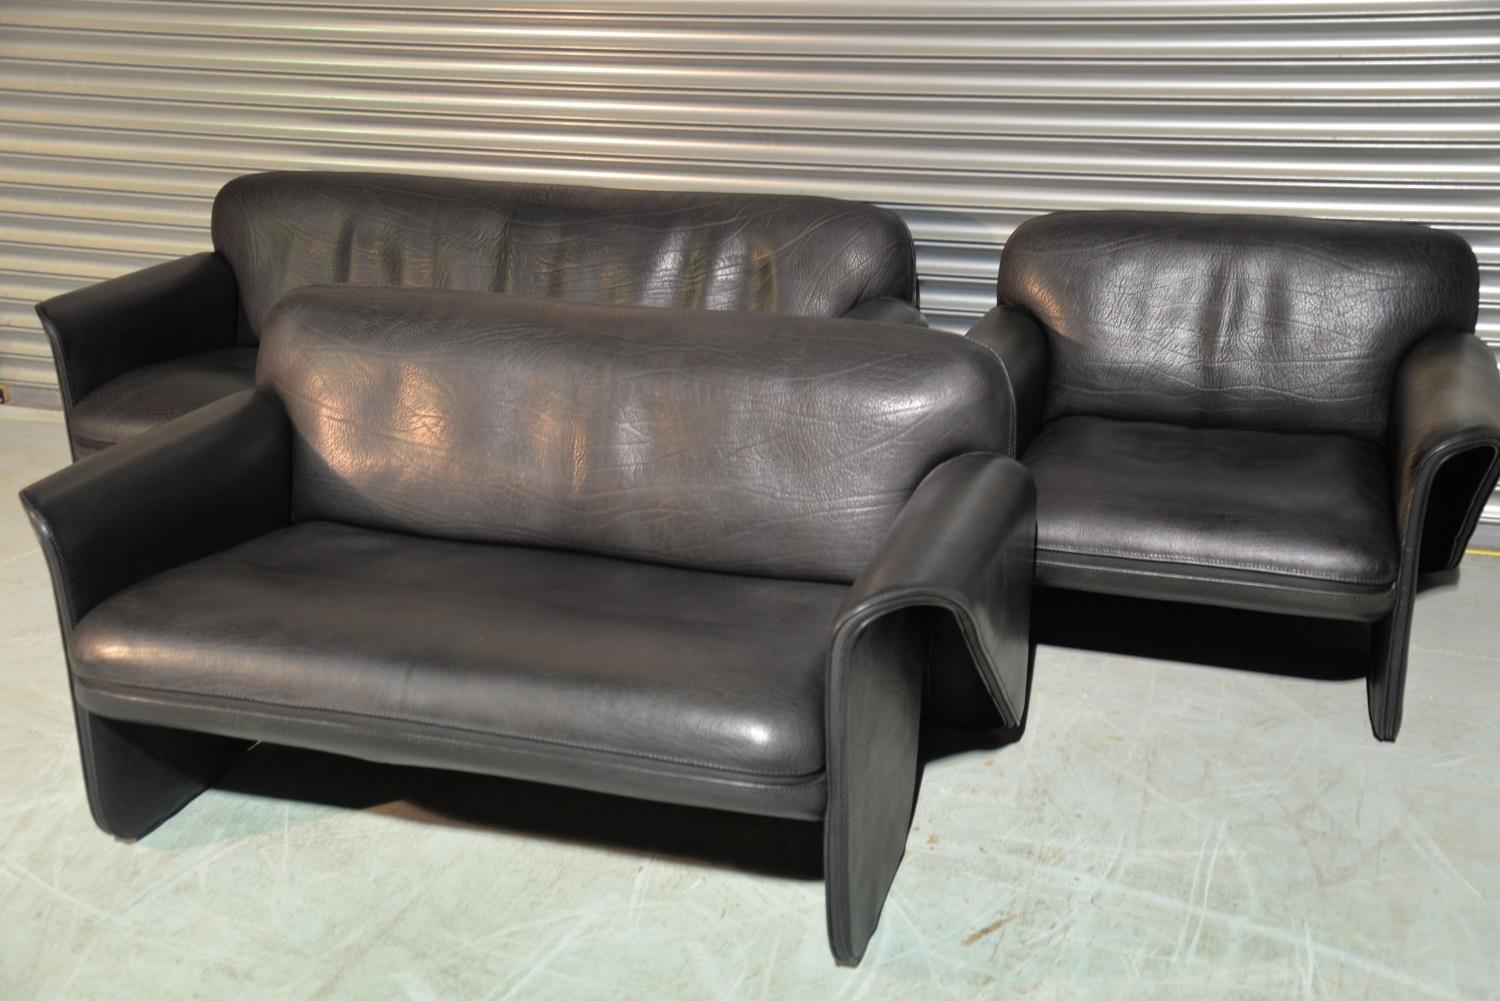 Discounted airfreight for our US and International customers (from 2 weeks door to door)

We are delighted to bring to you an ultra rare pair of vintage De Sede DS 125 sofas and a matching armchair designed by Gerd Lange in 1978. These sculptural